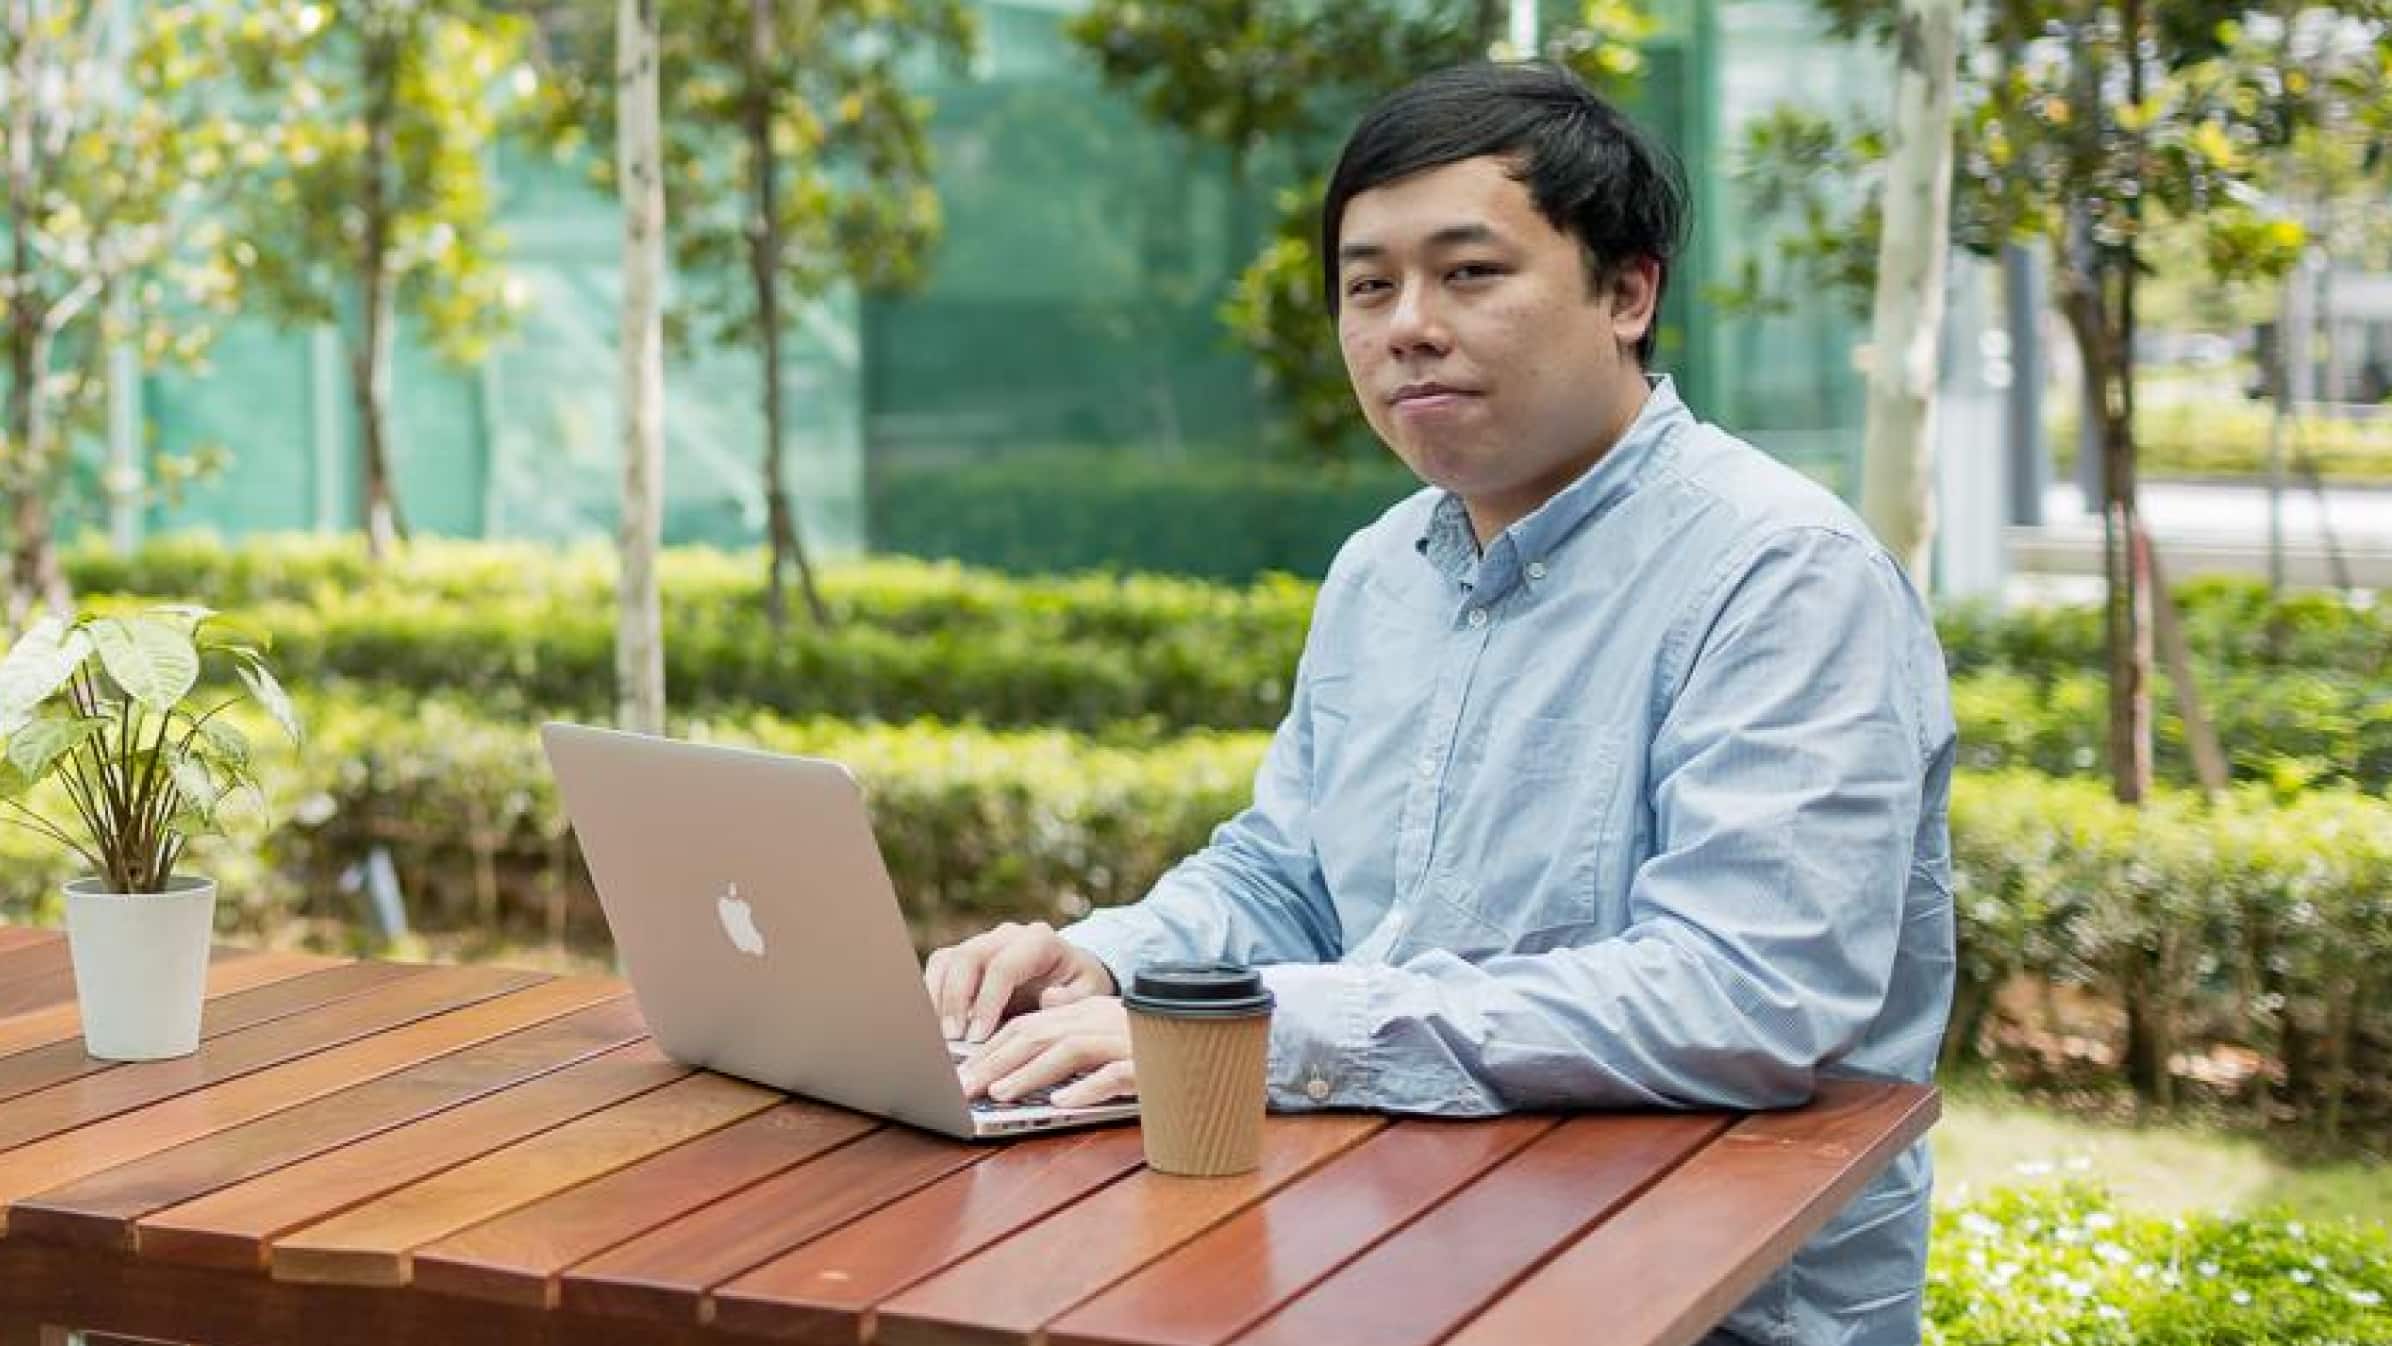 Lucas Chong from G&A Group working on a laptop computer at a table in a garden.